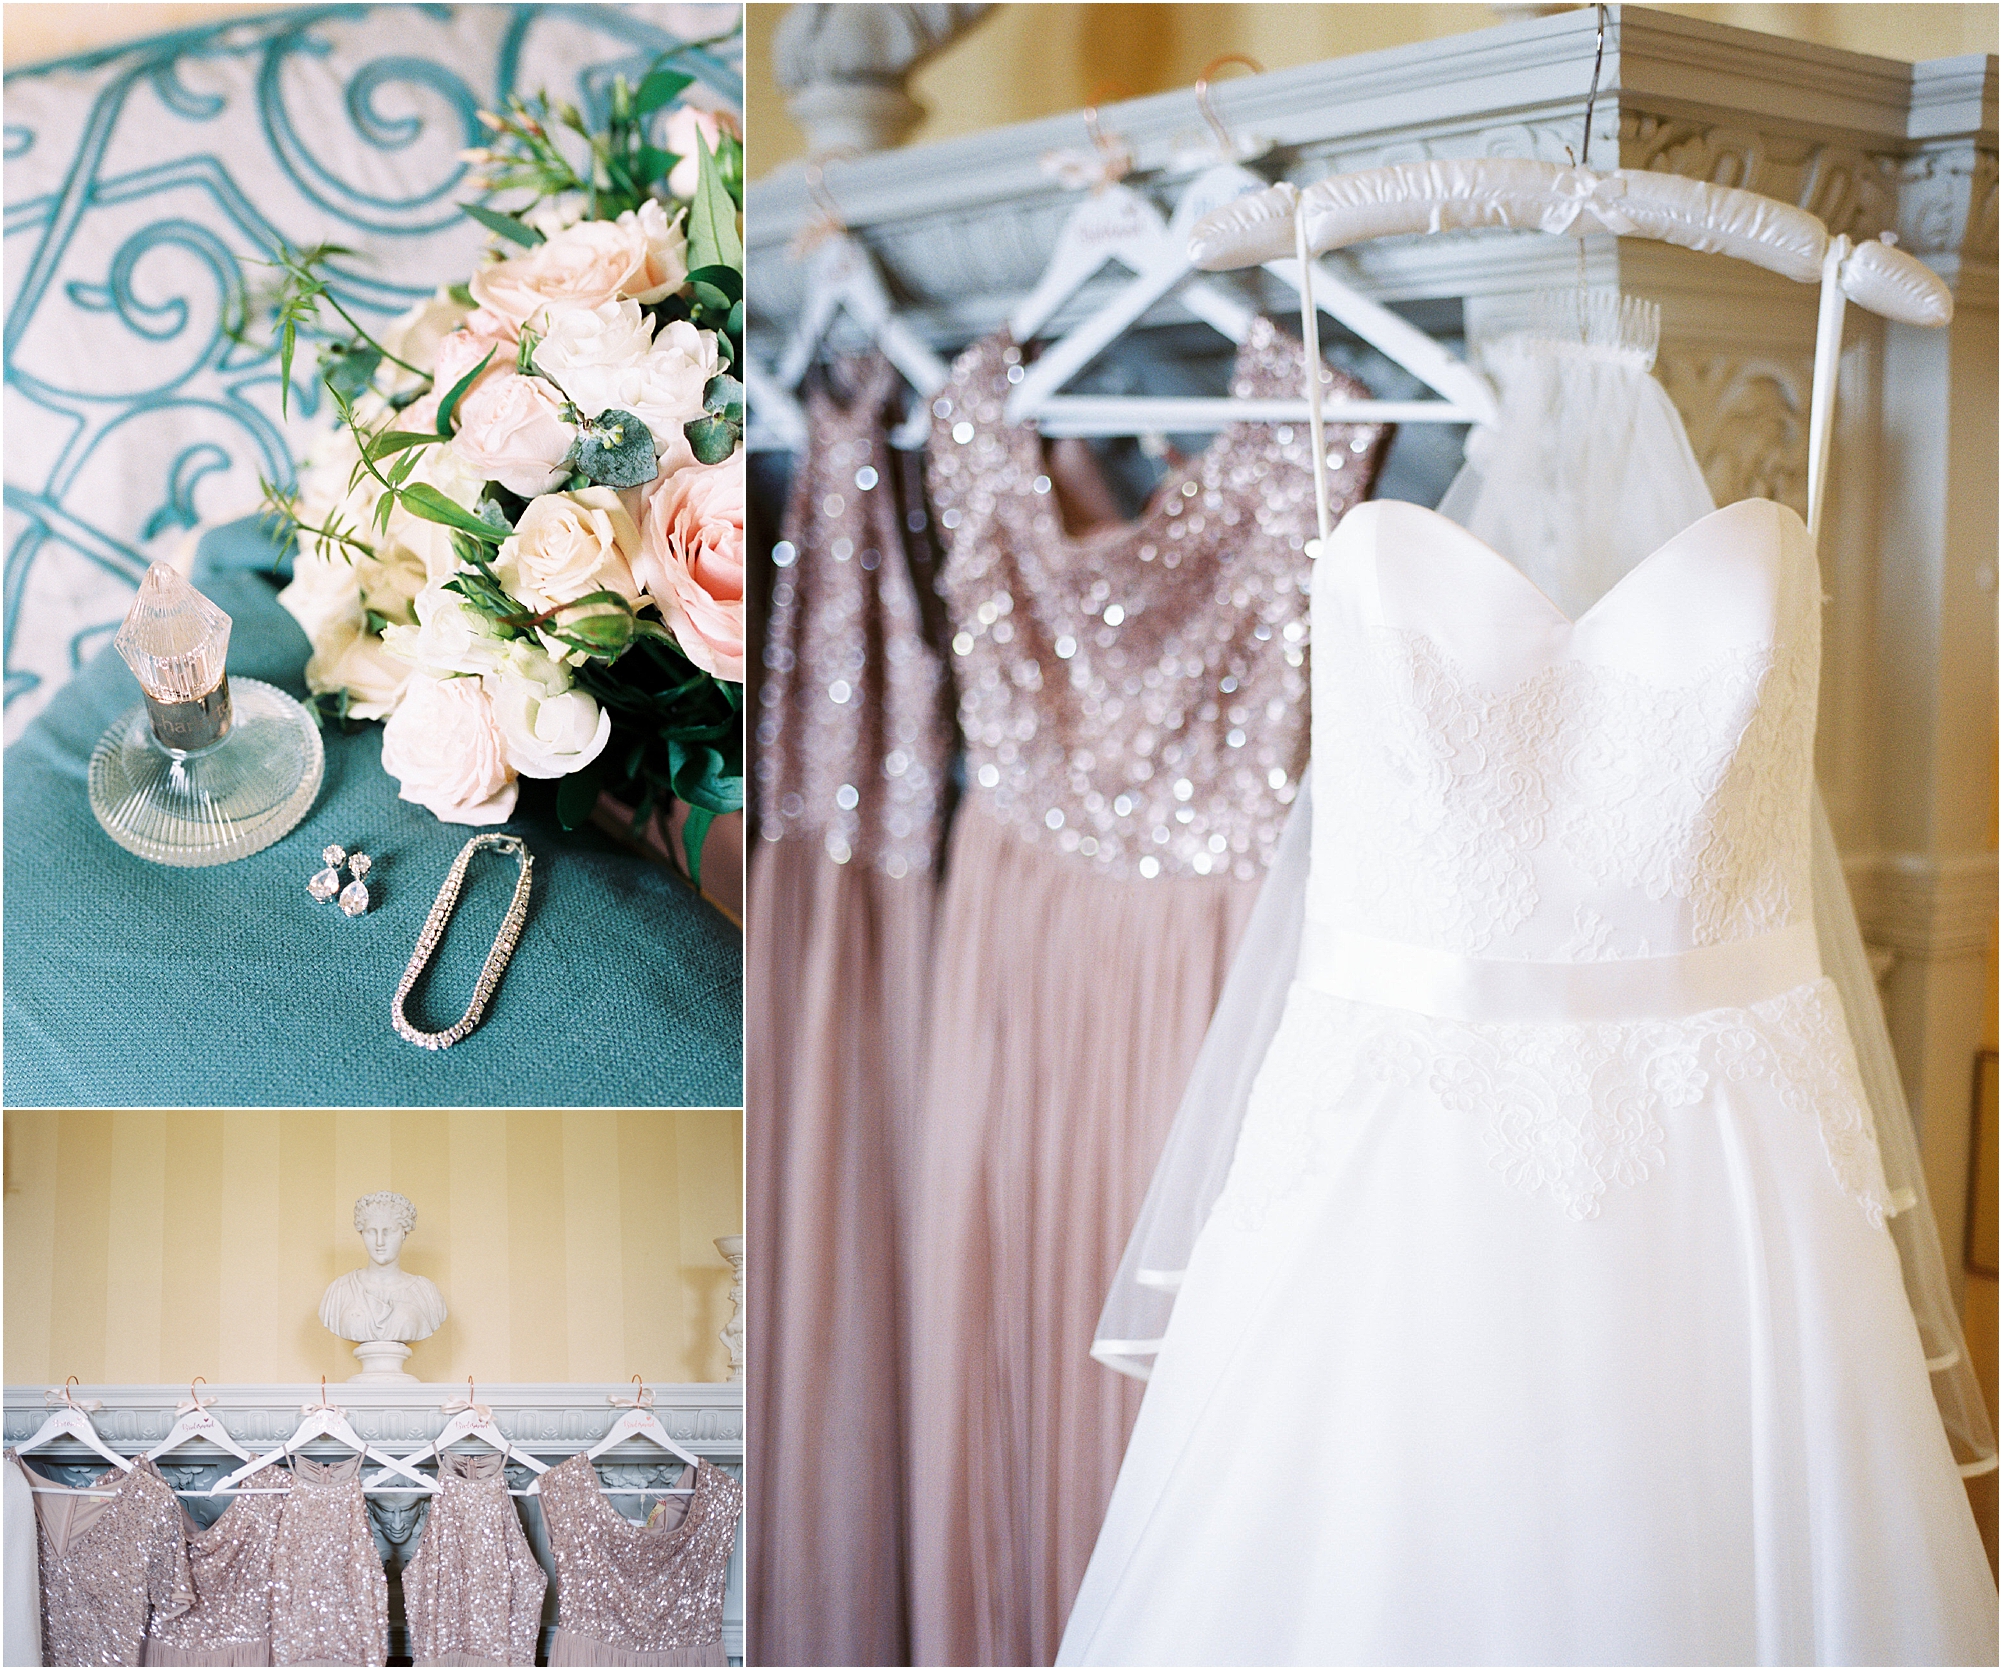 wedding dress and blush sequin bridesmaid's dresses hanging up at Stansted House